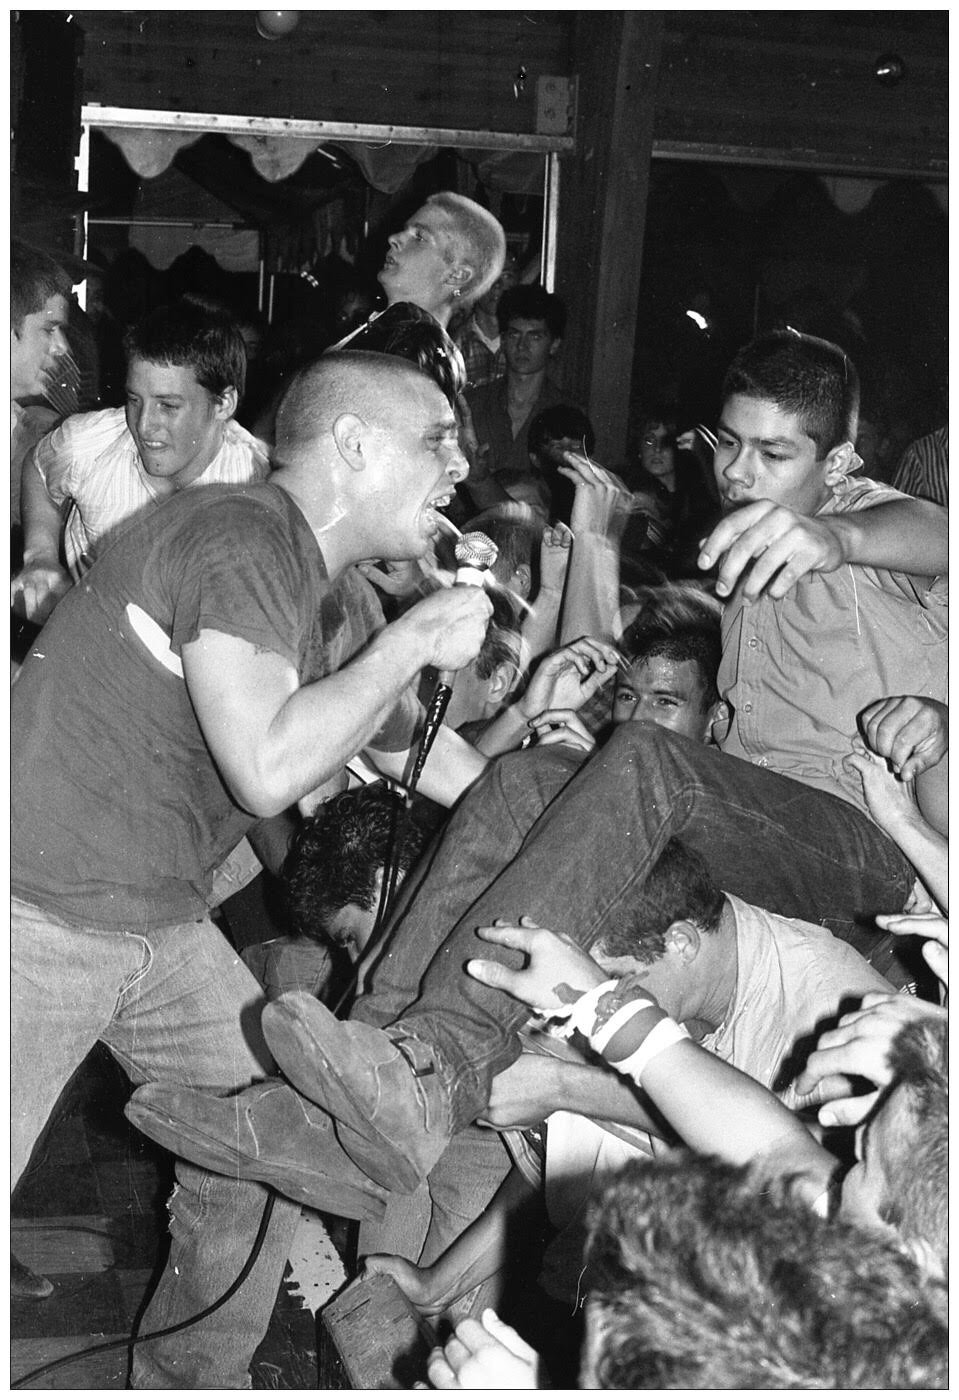 Go On Out, Get Some More: Edward Colver and the Photographic Legacy of  Hardcore Punk, from “Damaged” to “Die Lit” — Northwestern Art Review